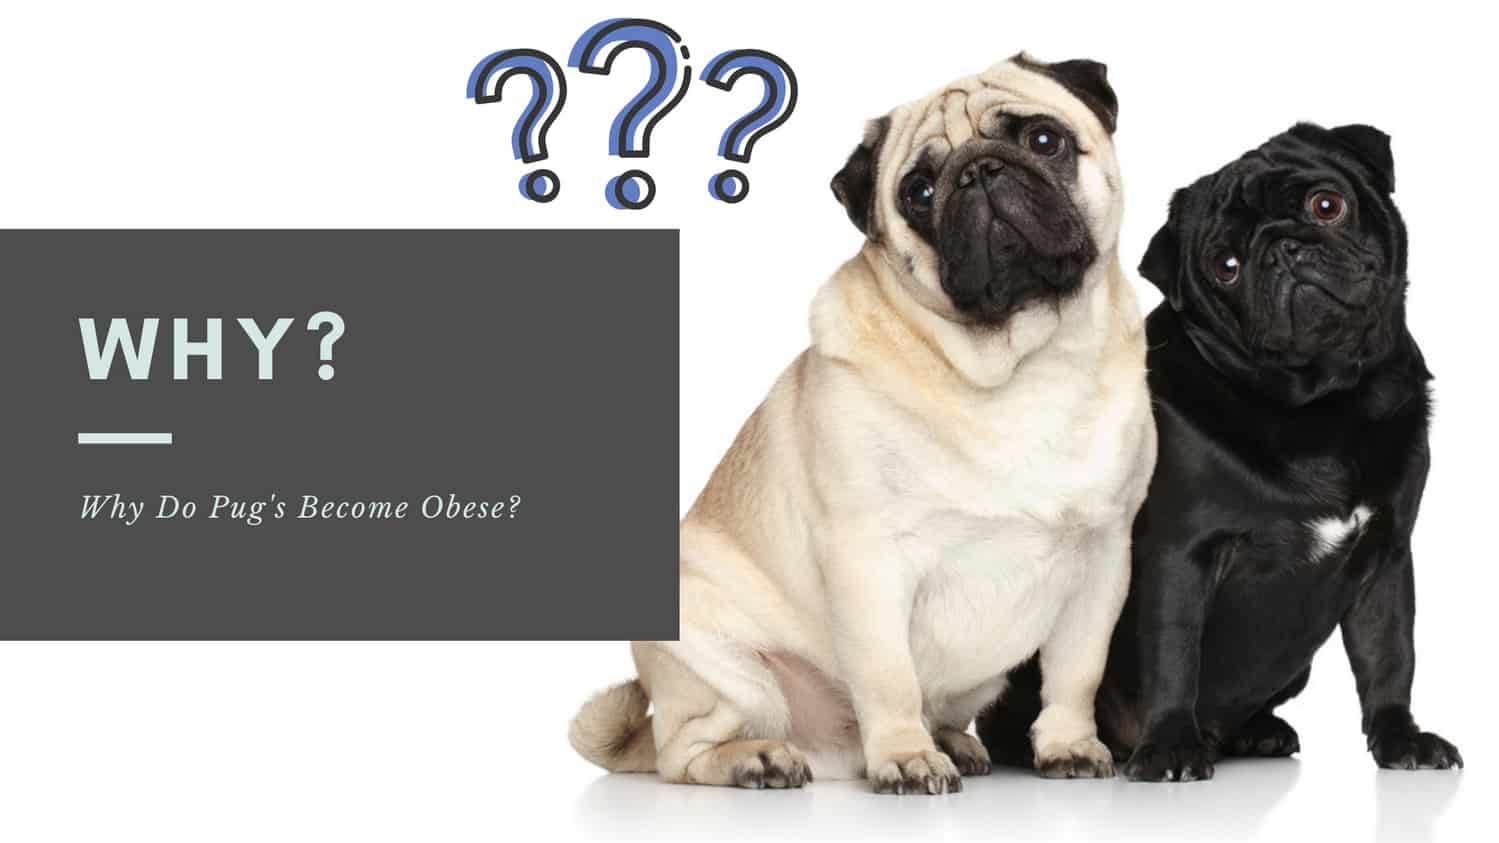 Why Do Pug's Become Obese?